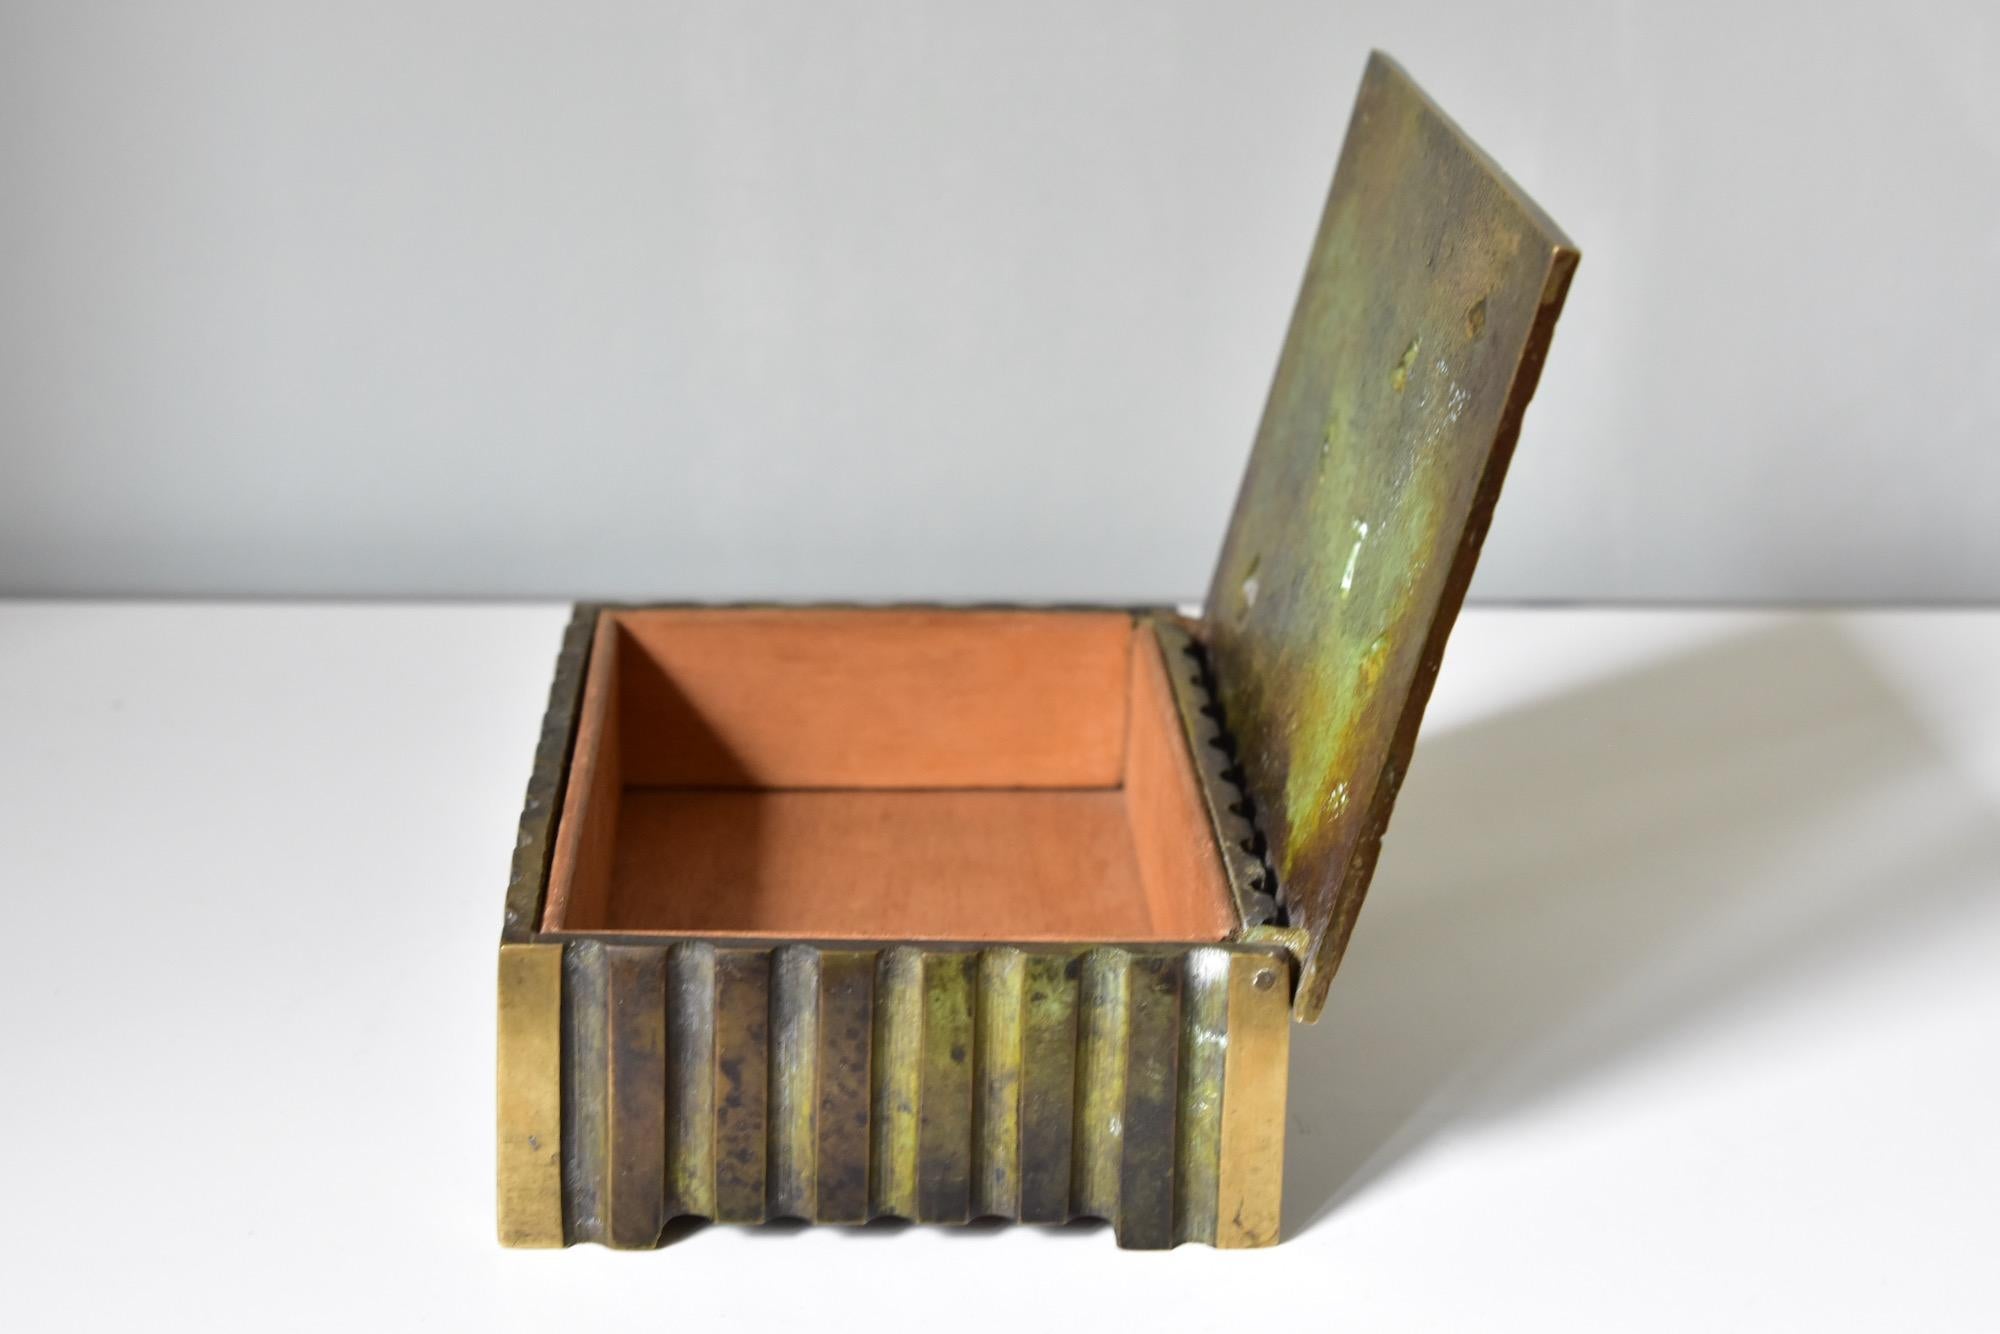 Nice bronze box by Mønsterbesk, Denmark. 
No damages with beautiful patina.